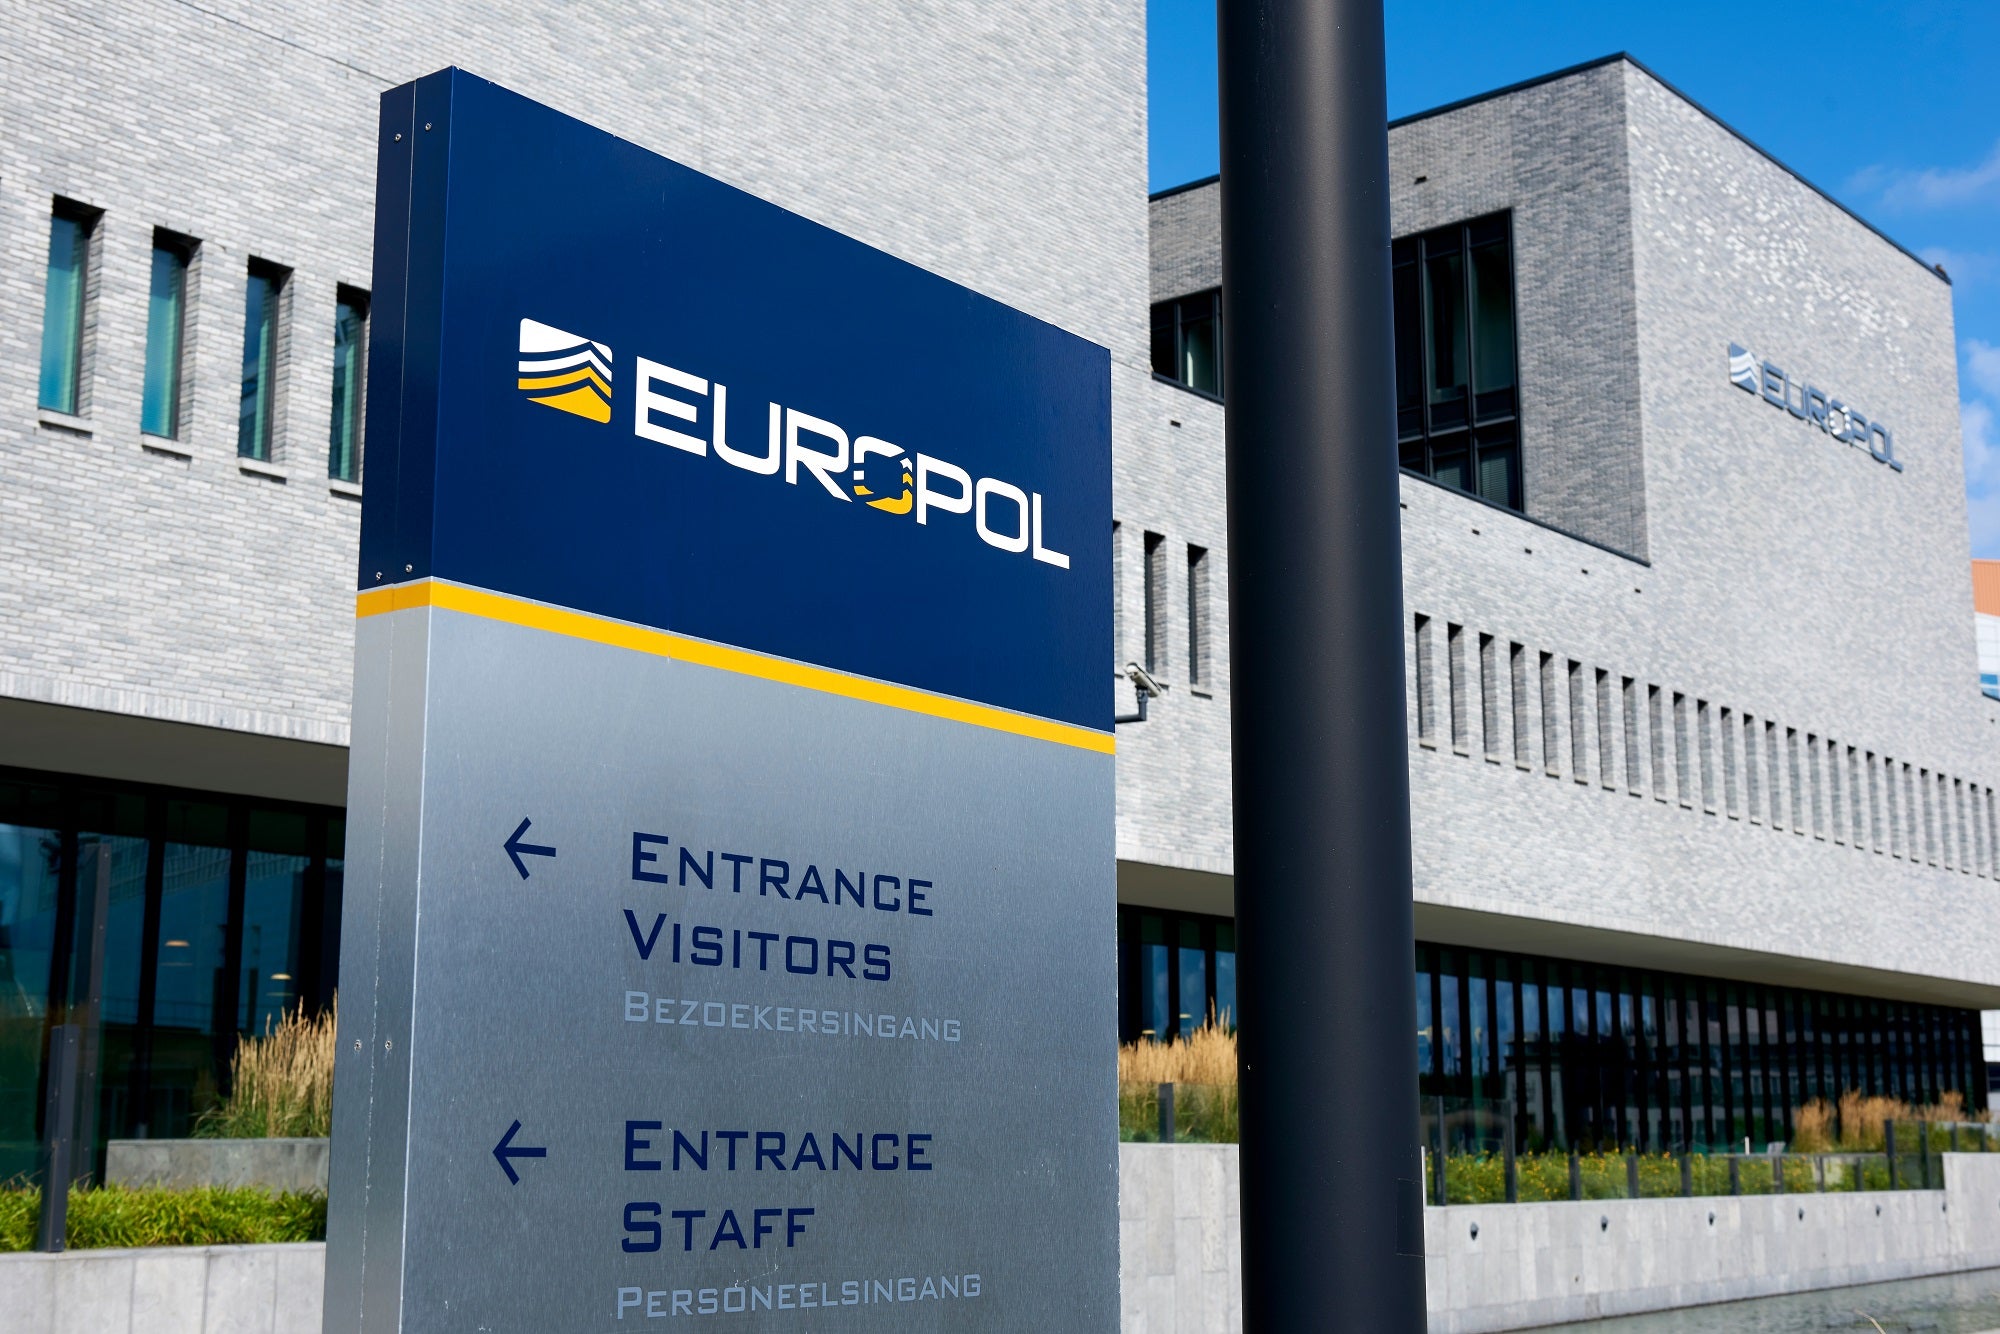 The headquarters of Europol in The Hague.